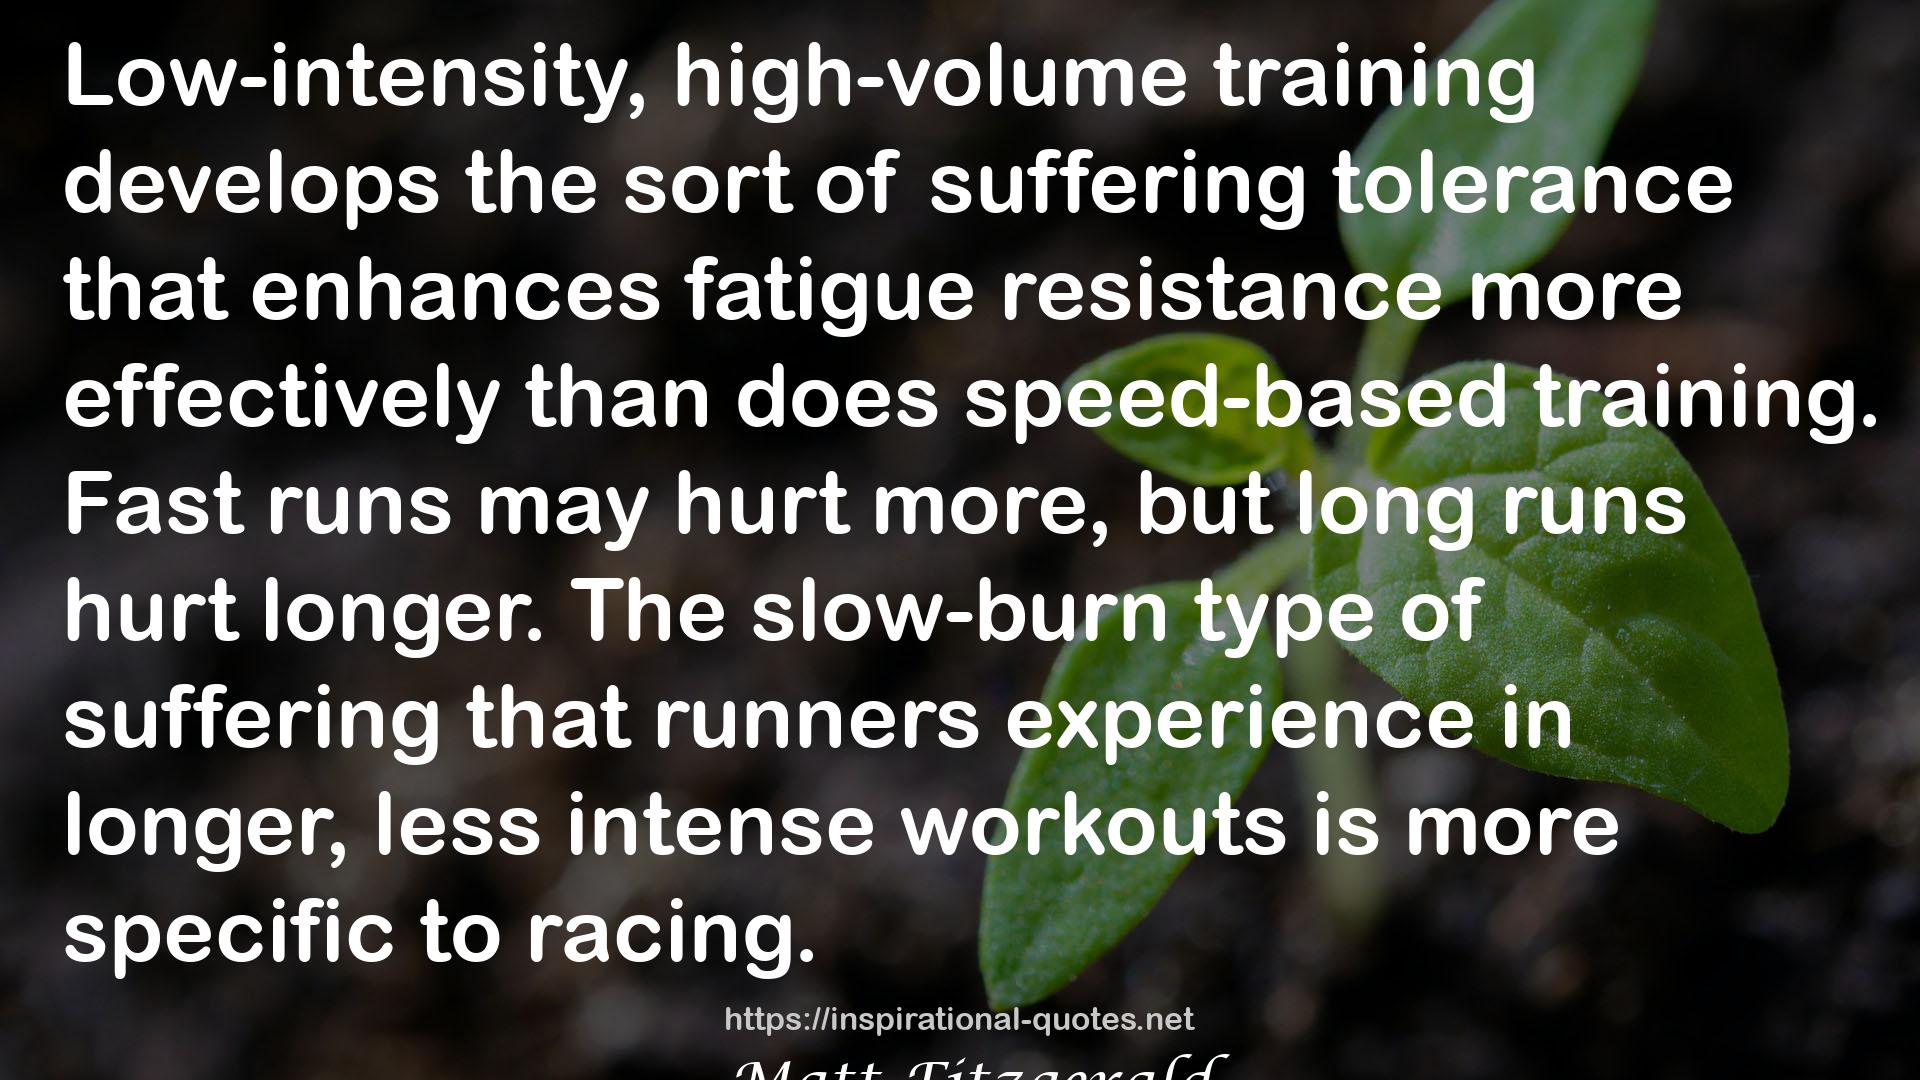 80/20 Running: Run Stronger and Race Faster by Training Slower QUOTES